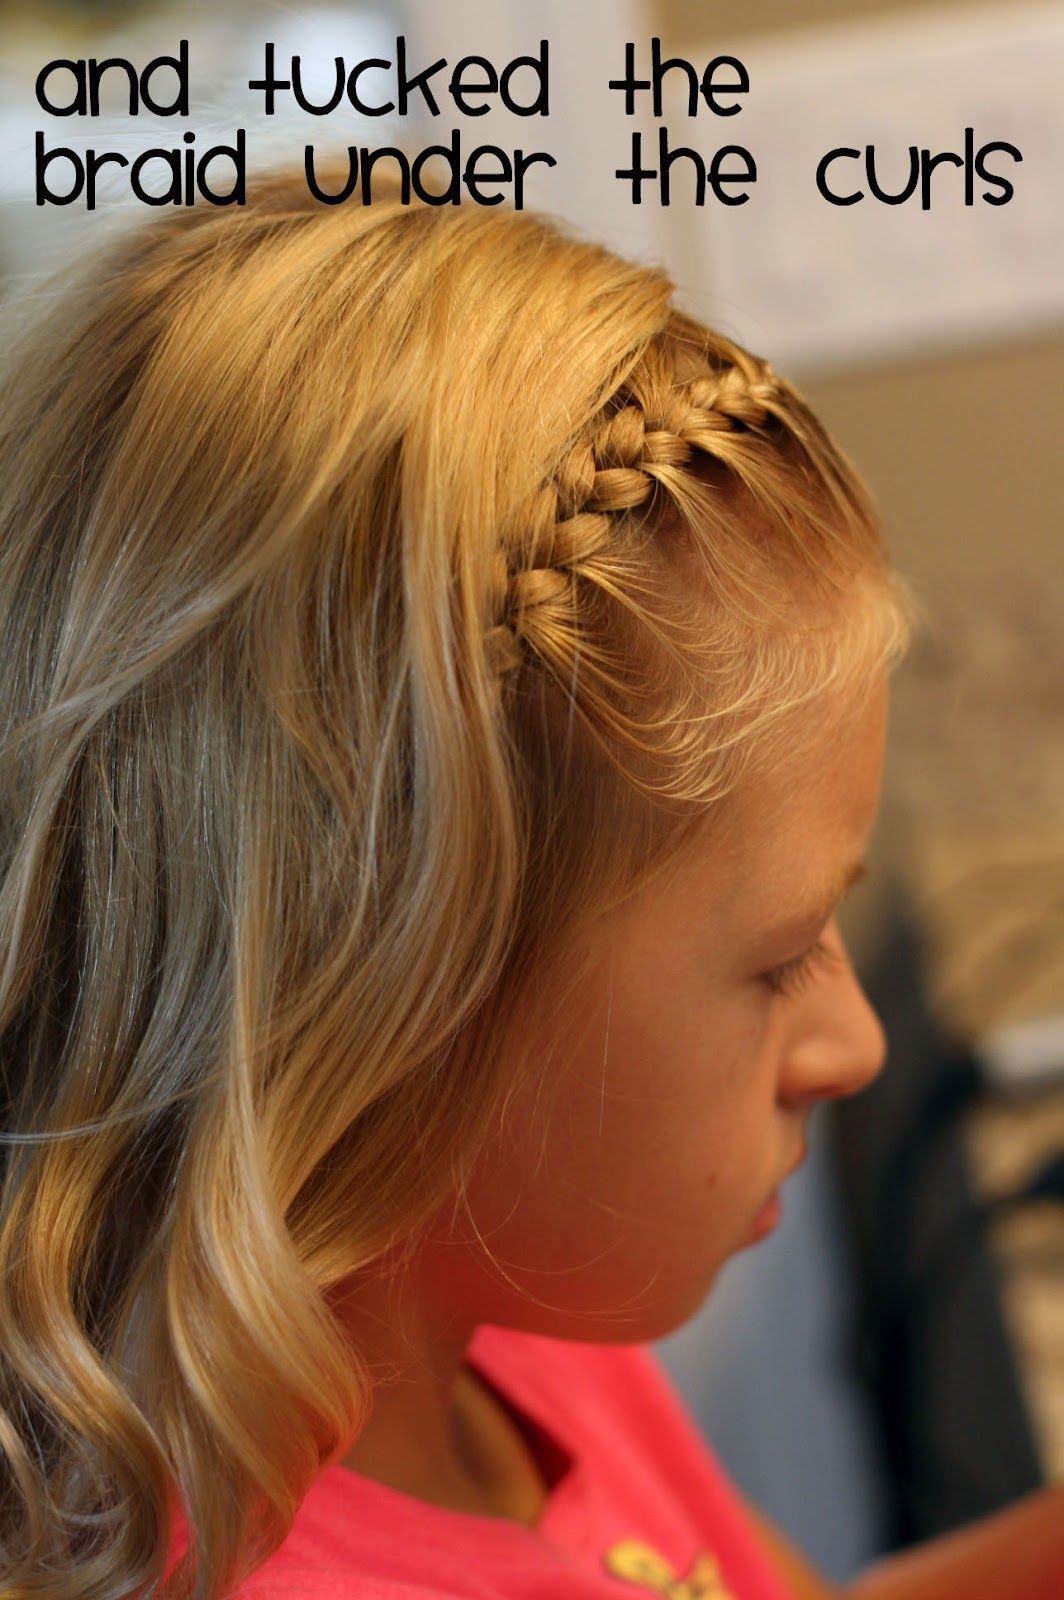 Massive list of little girl hairstyles with instructions…I got lost in this site for over an hour! Awesome ideas!